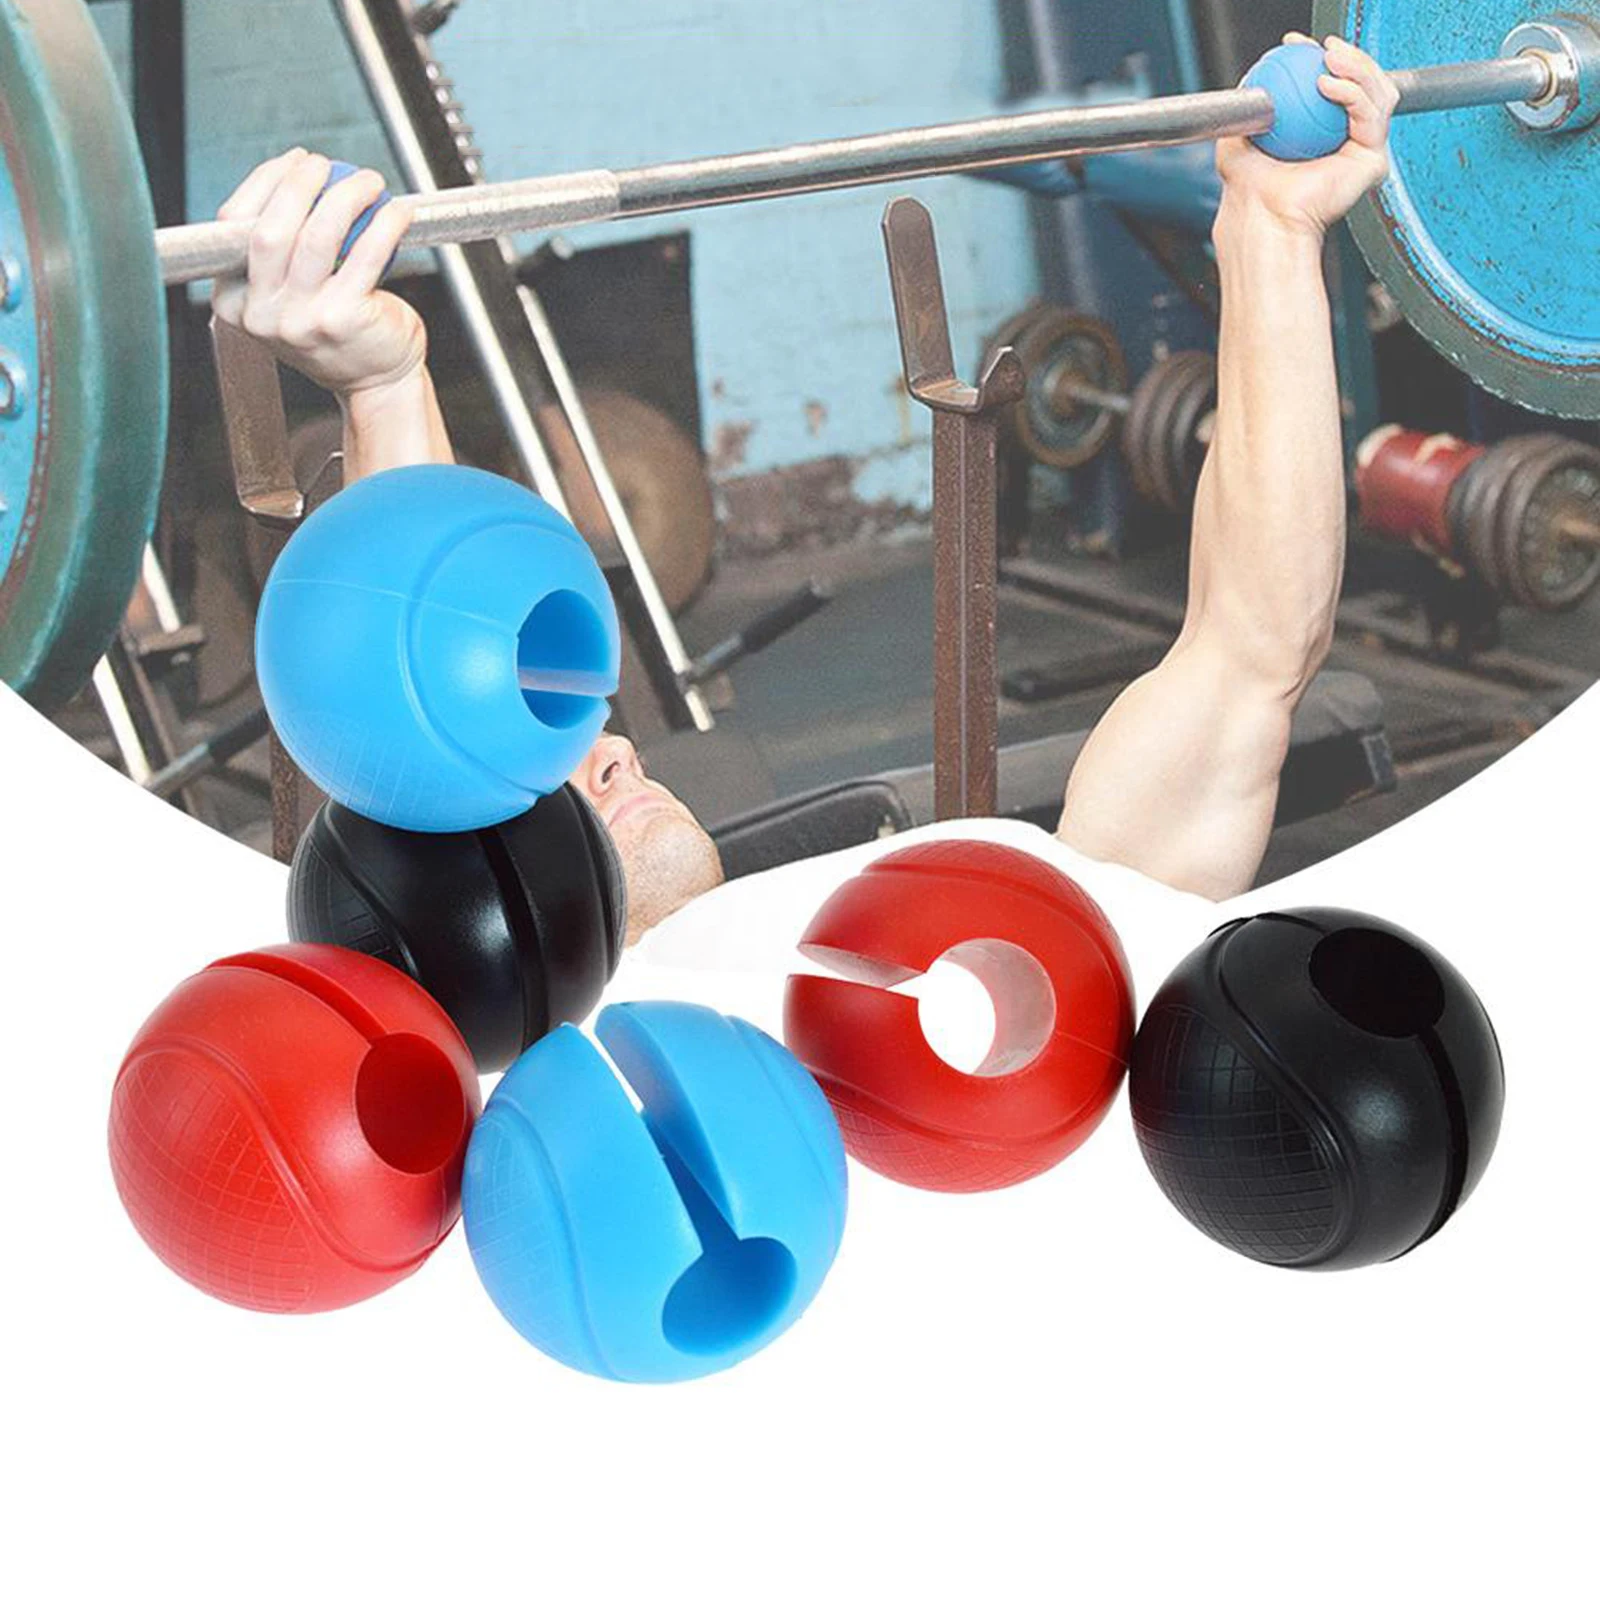 Details about   2x Fat Bar Hantelgriffe Training Grip Barbell und Dumbbell Grips Adapter Fitnes 